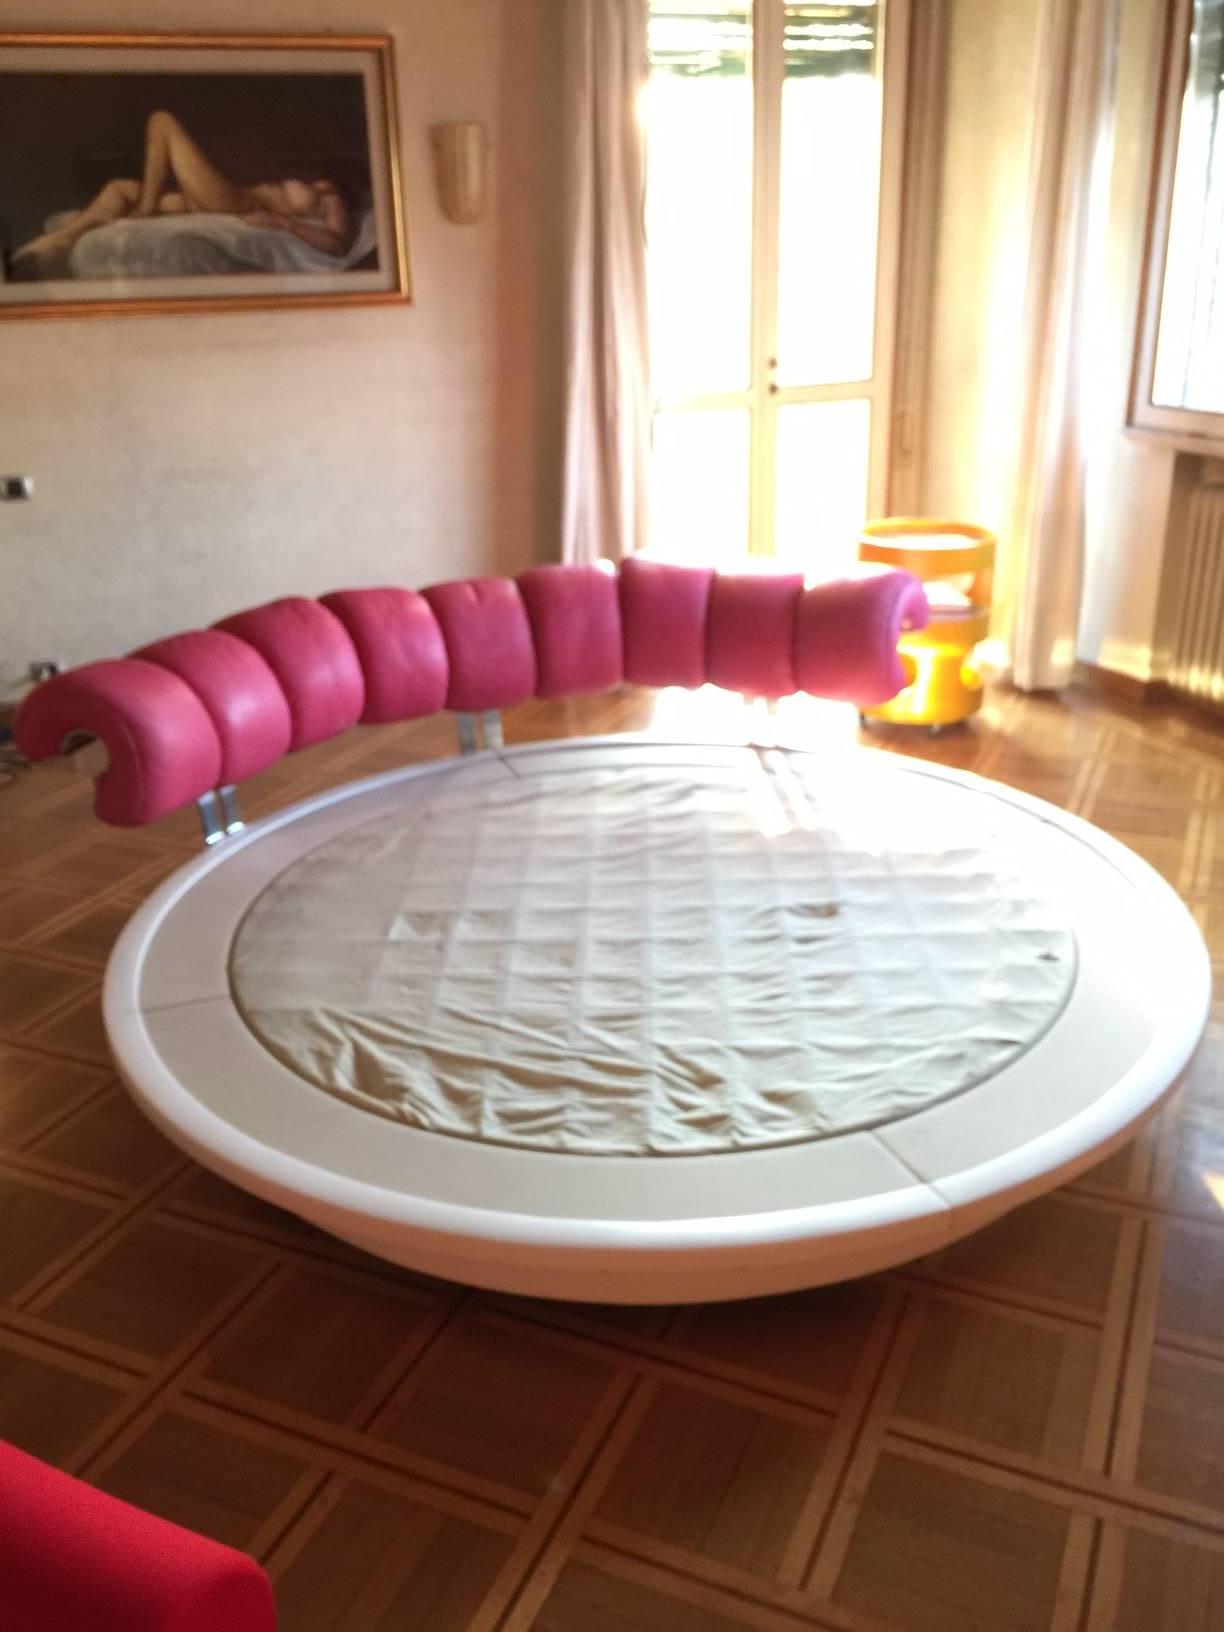 Rotating 360 round bed designed in 1967 by Luigi Massoni for Poltrona Frau. Very nice conditions, wear consistent with age and use. Swivel plywood white vinyl base, pink leather headboard. 